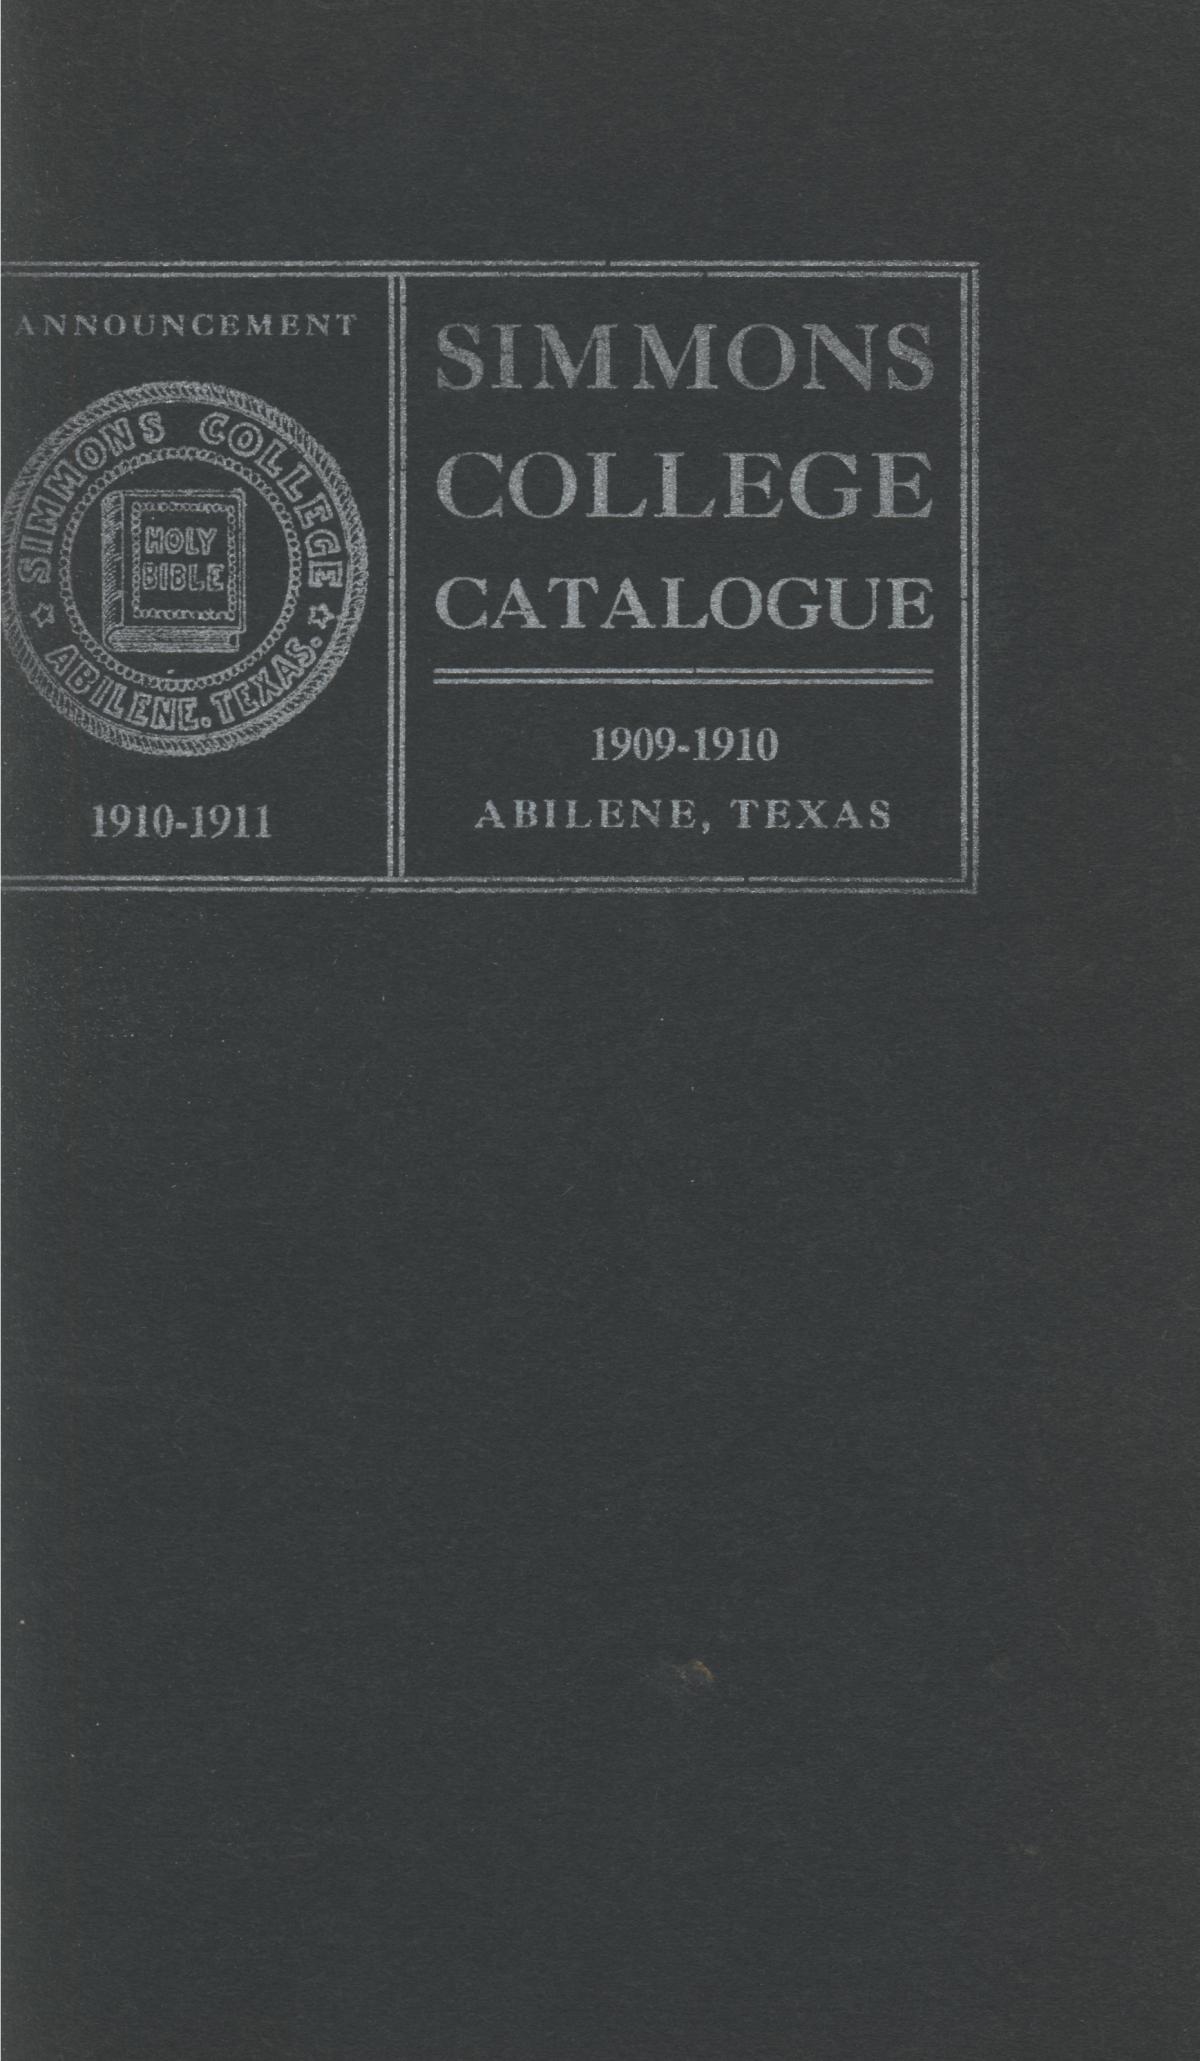 Catalogue of Simmons College, 1909-1910
                                                
                                                    Front Cover
                                                